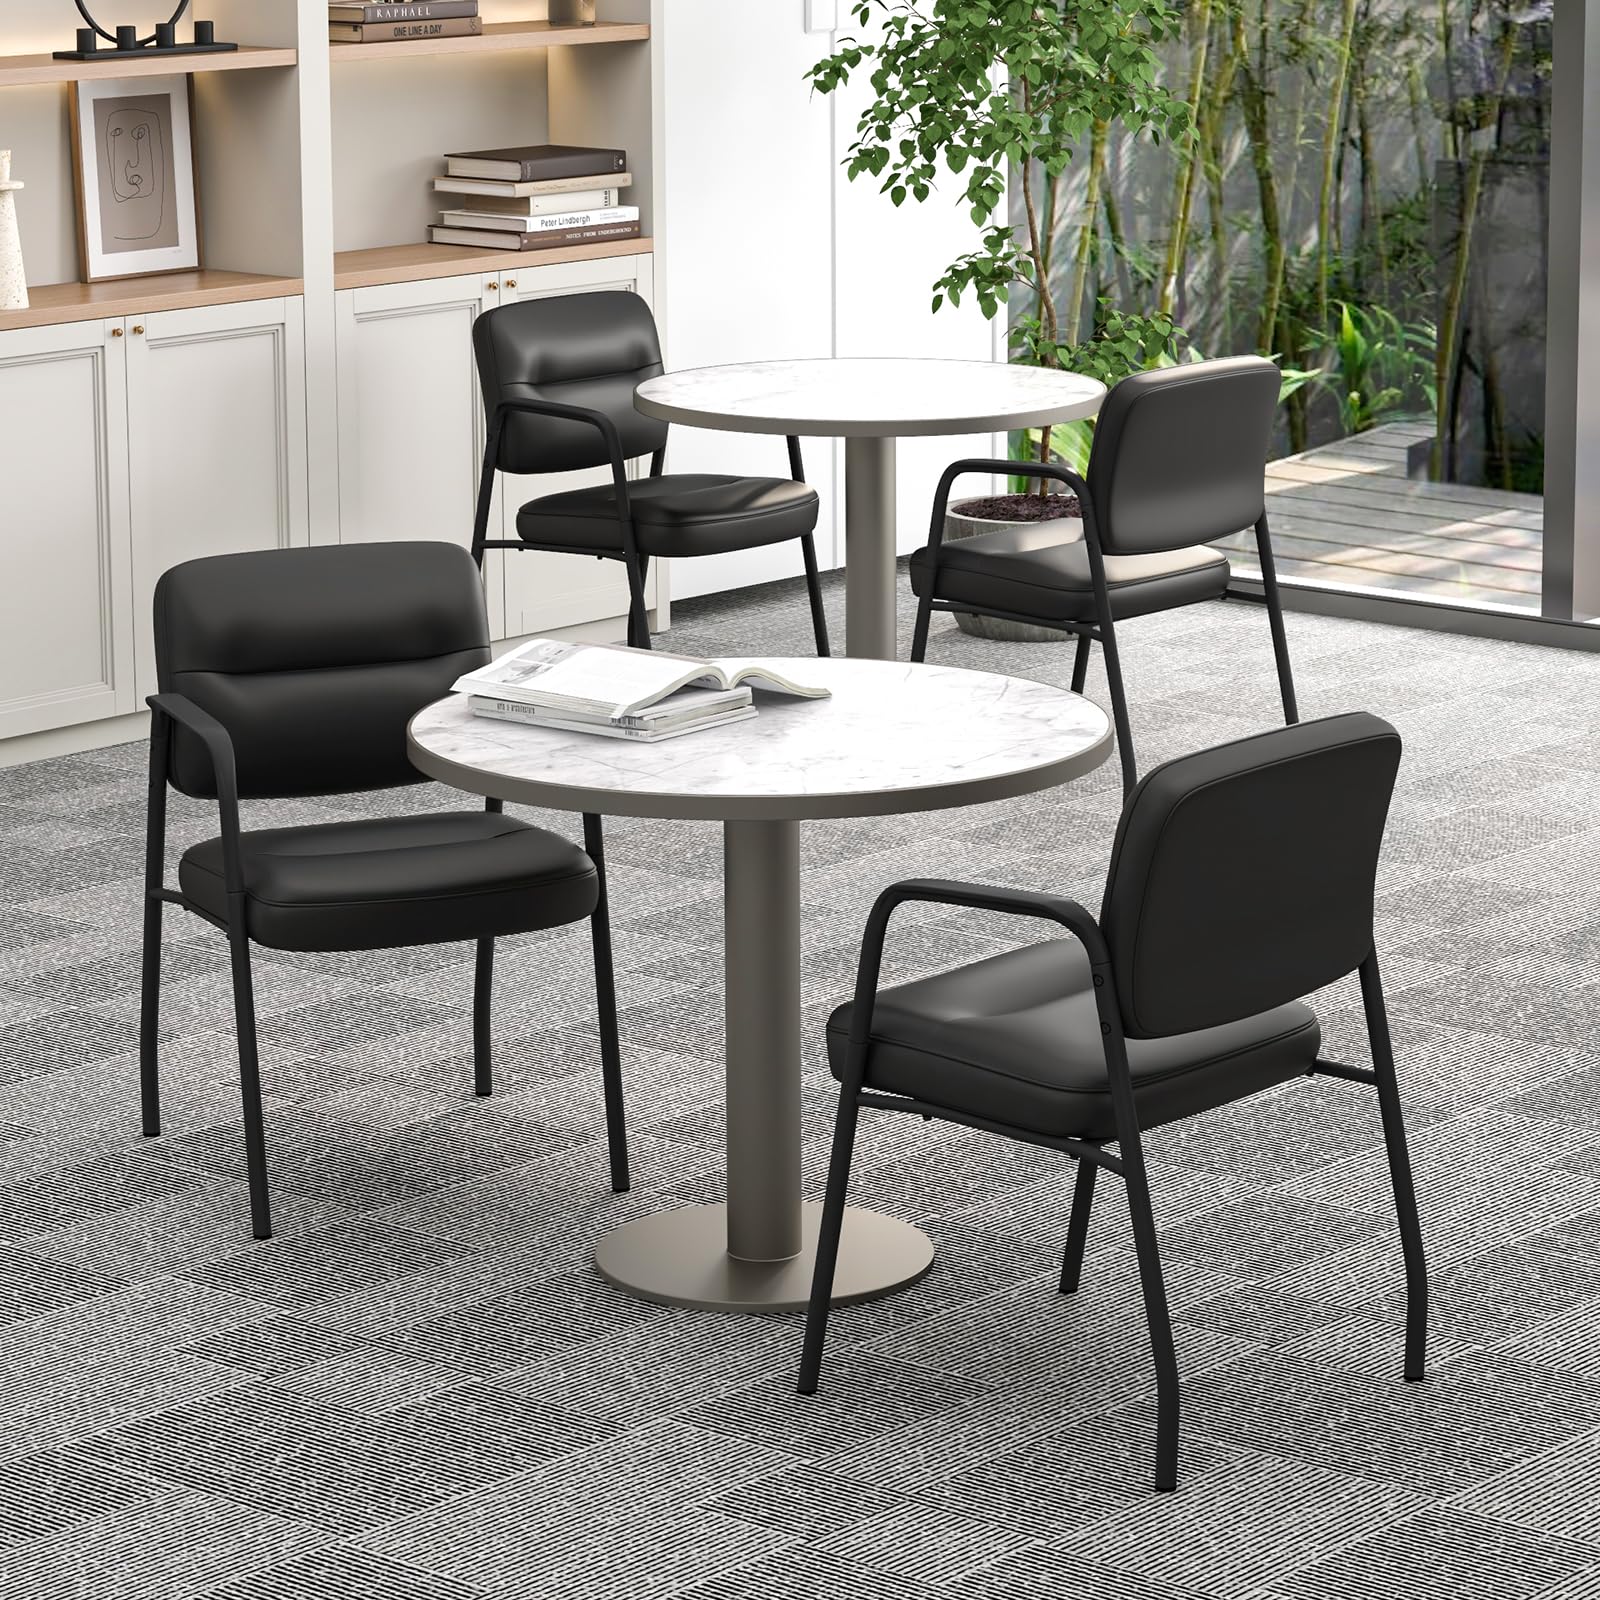 Giantex Waiting Room Chair Set - Upholstered Reception Chairs with Mixed PU Leather